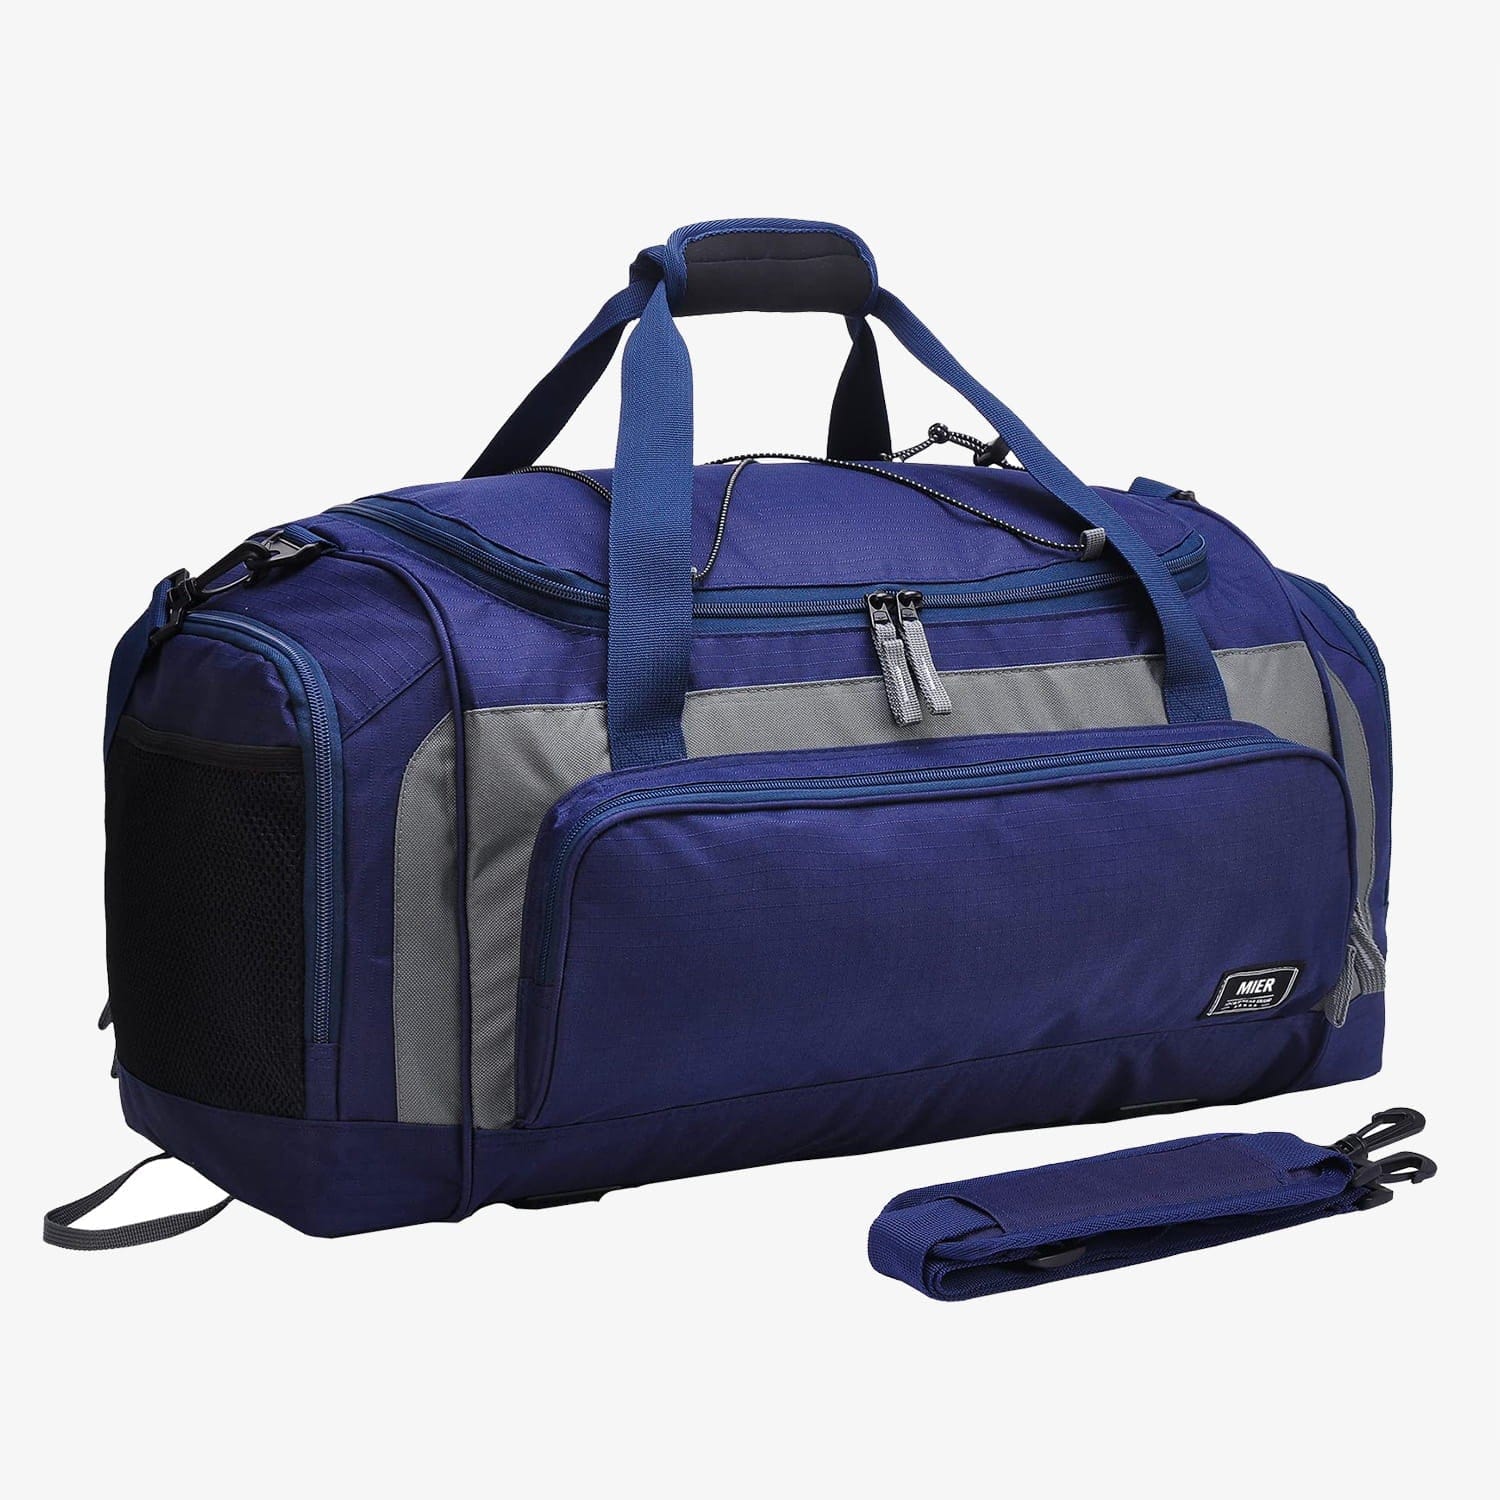 Large Sports Gym Bag Duffel Bag with Shoe Compartment Gym Duffel Bag Navy MIER